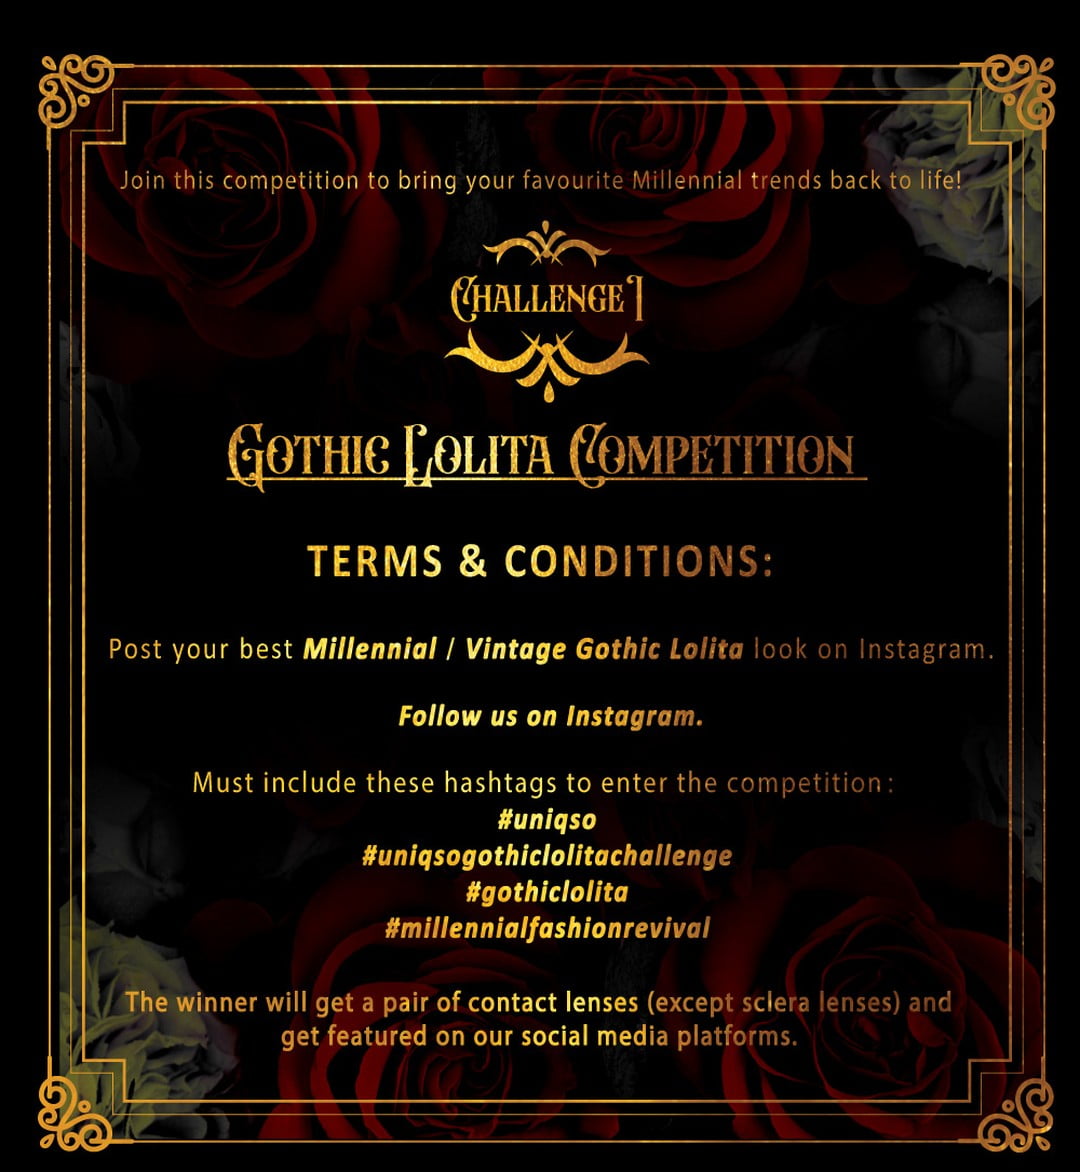 🥀 CHALLENGE I : Gothic Lolita Competition 🥀

We encourage you to join this competition to bring your favourite Millennial trends back to life ✨
What are you waiting for ⁉️

‼️ Terms and Conditions ‼️
1. Post your best millennial Gothic Lolita look on Instagram.
2. Follow us on Instagram.
3. Must include these 4 hashtags below to enter the competition.
#UNIQSO #UNIQSOGothicLolitaChallenge #gothiclolita #MillennialFashionRevival 

⚠️ For more information on this challenge, kindly refer to our latest Instagram Feed 🥀

The winner will get a pair of contact lenses (except sclera lenses) and get featured on our social media platforms, such as newsletter, Instagram and Facebook.

Starting 2nd May 2022 till 15th May 2022

GOOD LUCK 🦇
.
.
#uniqso #beunique #コスプレ #カラコン通販 #送料無料 #콘텍트렌즈 #kontaktlinse #カラーコンタクト #goth #gothic #challengestart 

#UNIQSOGothicLolitaChallenge #gothiclolita #MillennialFashionRevival